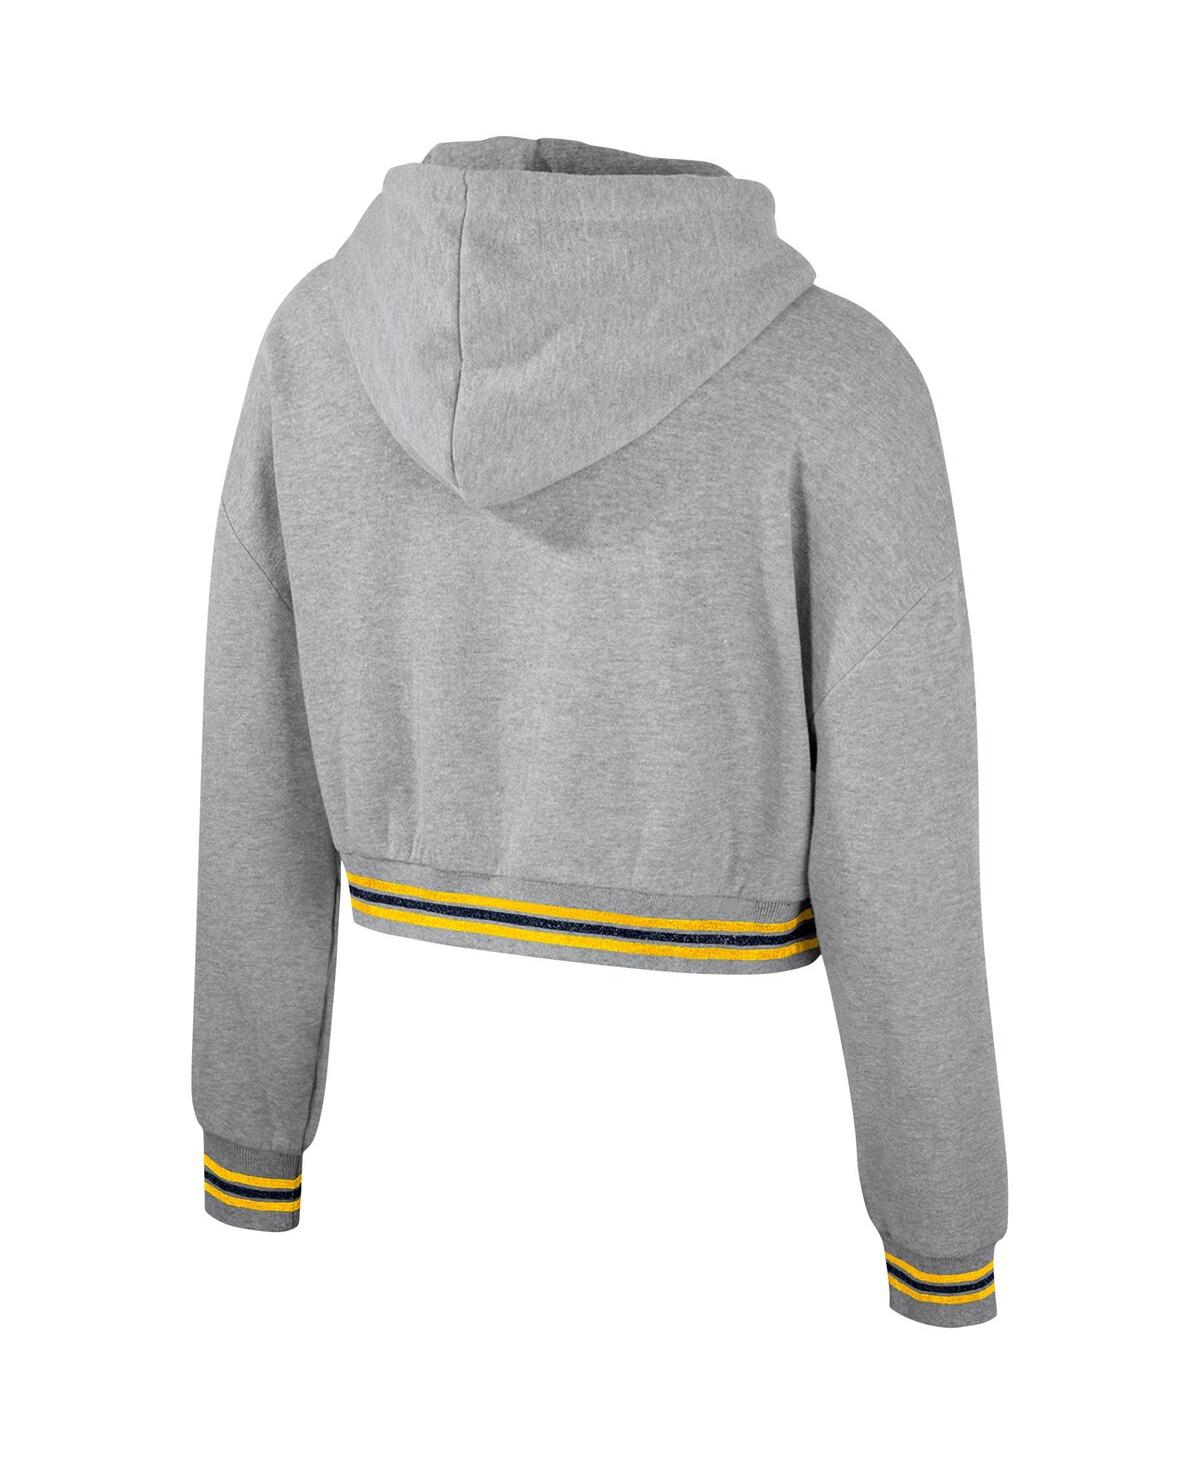 Shop The Wild Collective Women's  Heather Gray Distressed Michigan Wolverines Cropped Shimmer Pullover Hoo